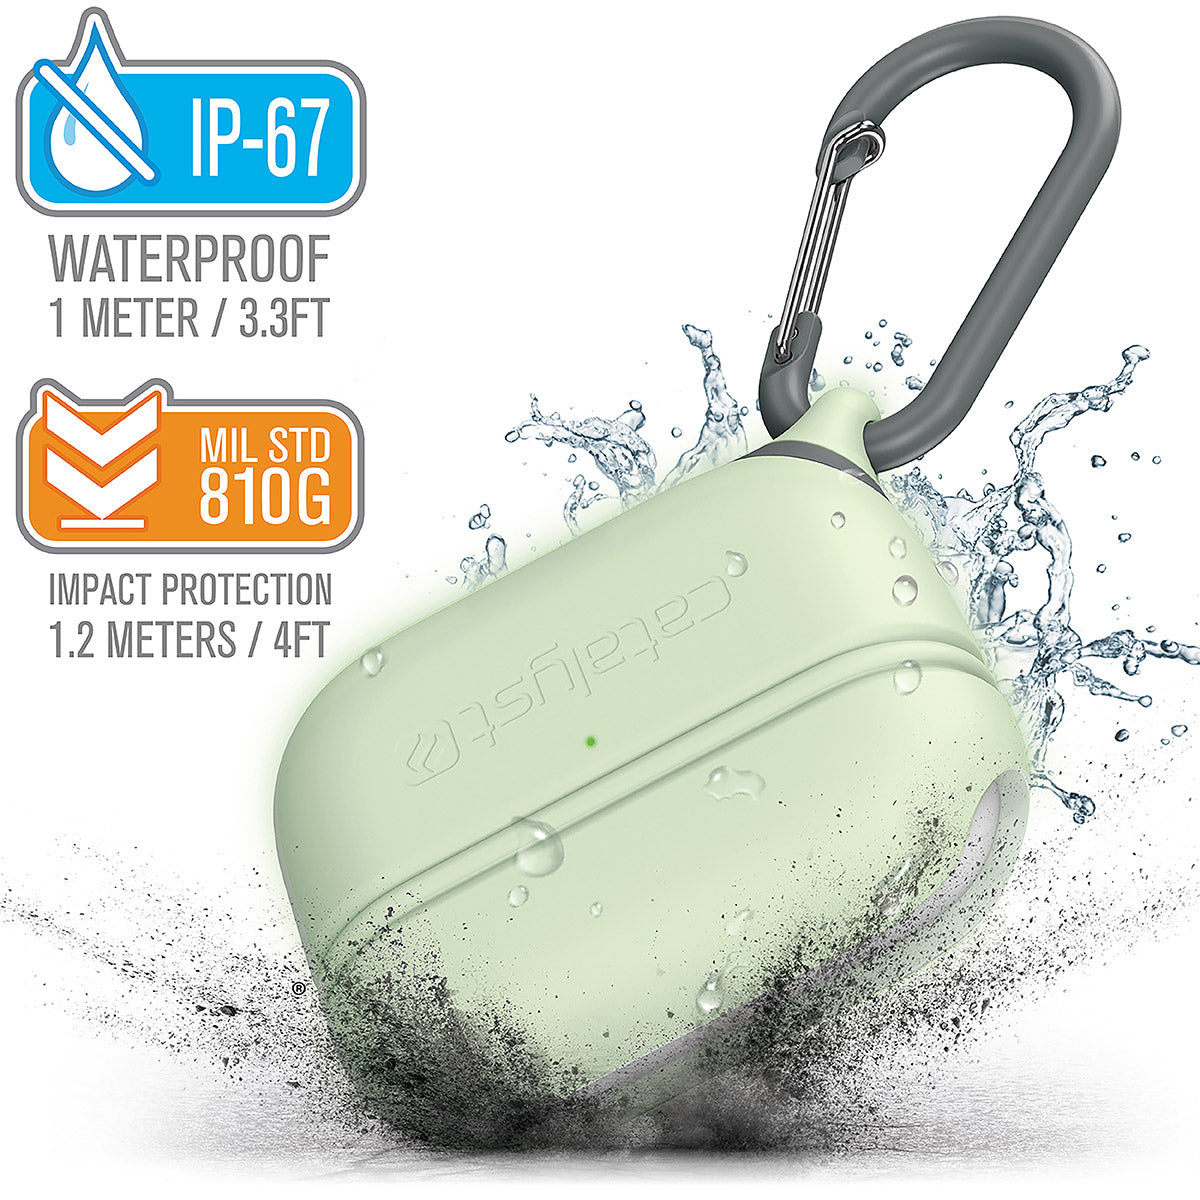 catalyst airpods pro gen 2 1 waterproof case carabiner special edition glow in the dark with cracked floor and splashes of water text reads ip-67 waterproof 1 meter 3.3ft mil std 810g impact protection 1.2 meters 4ft